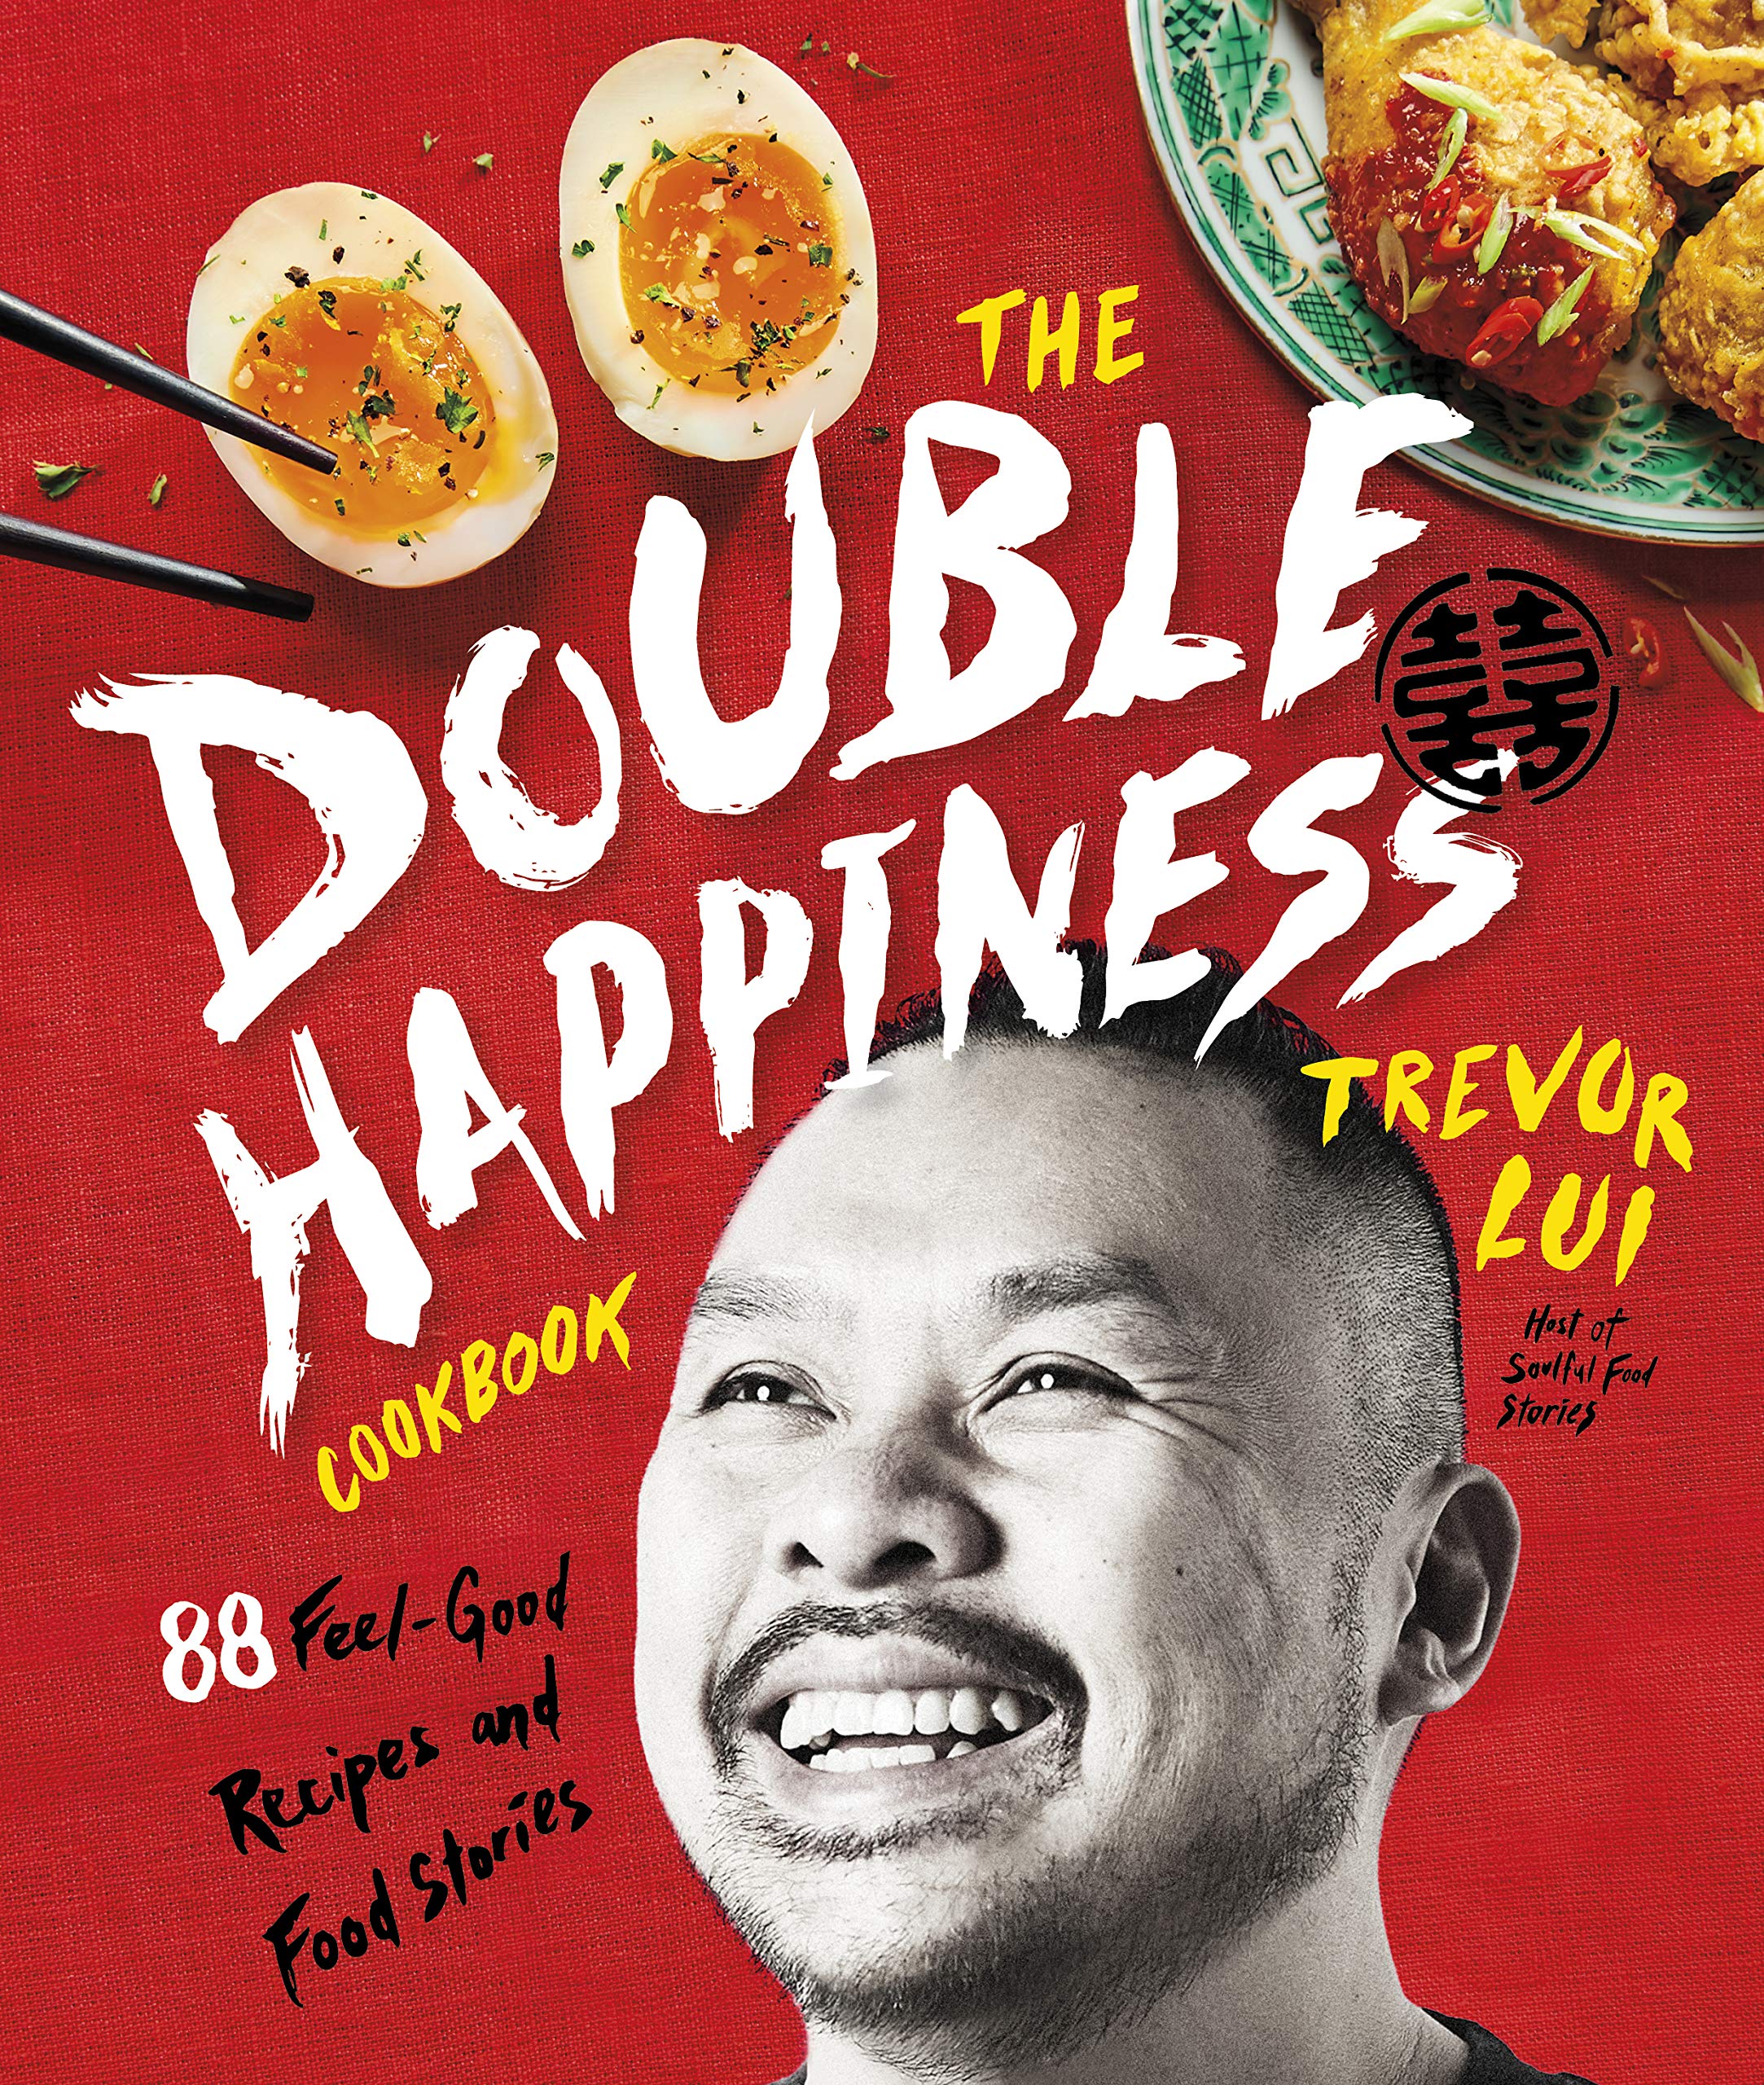 The Double Happiness Cookbook: 88 Feel-Good Recipes and Food Stories (Trevor Lui)